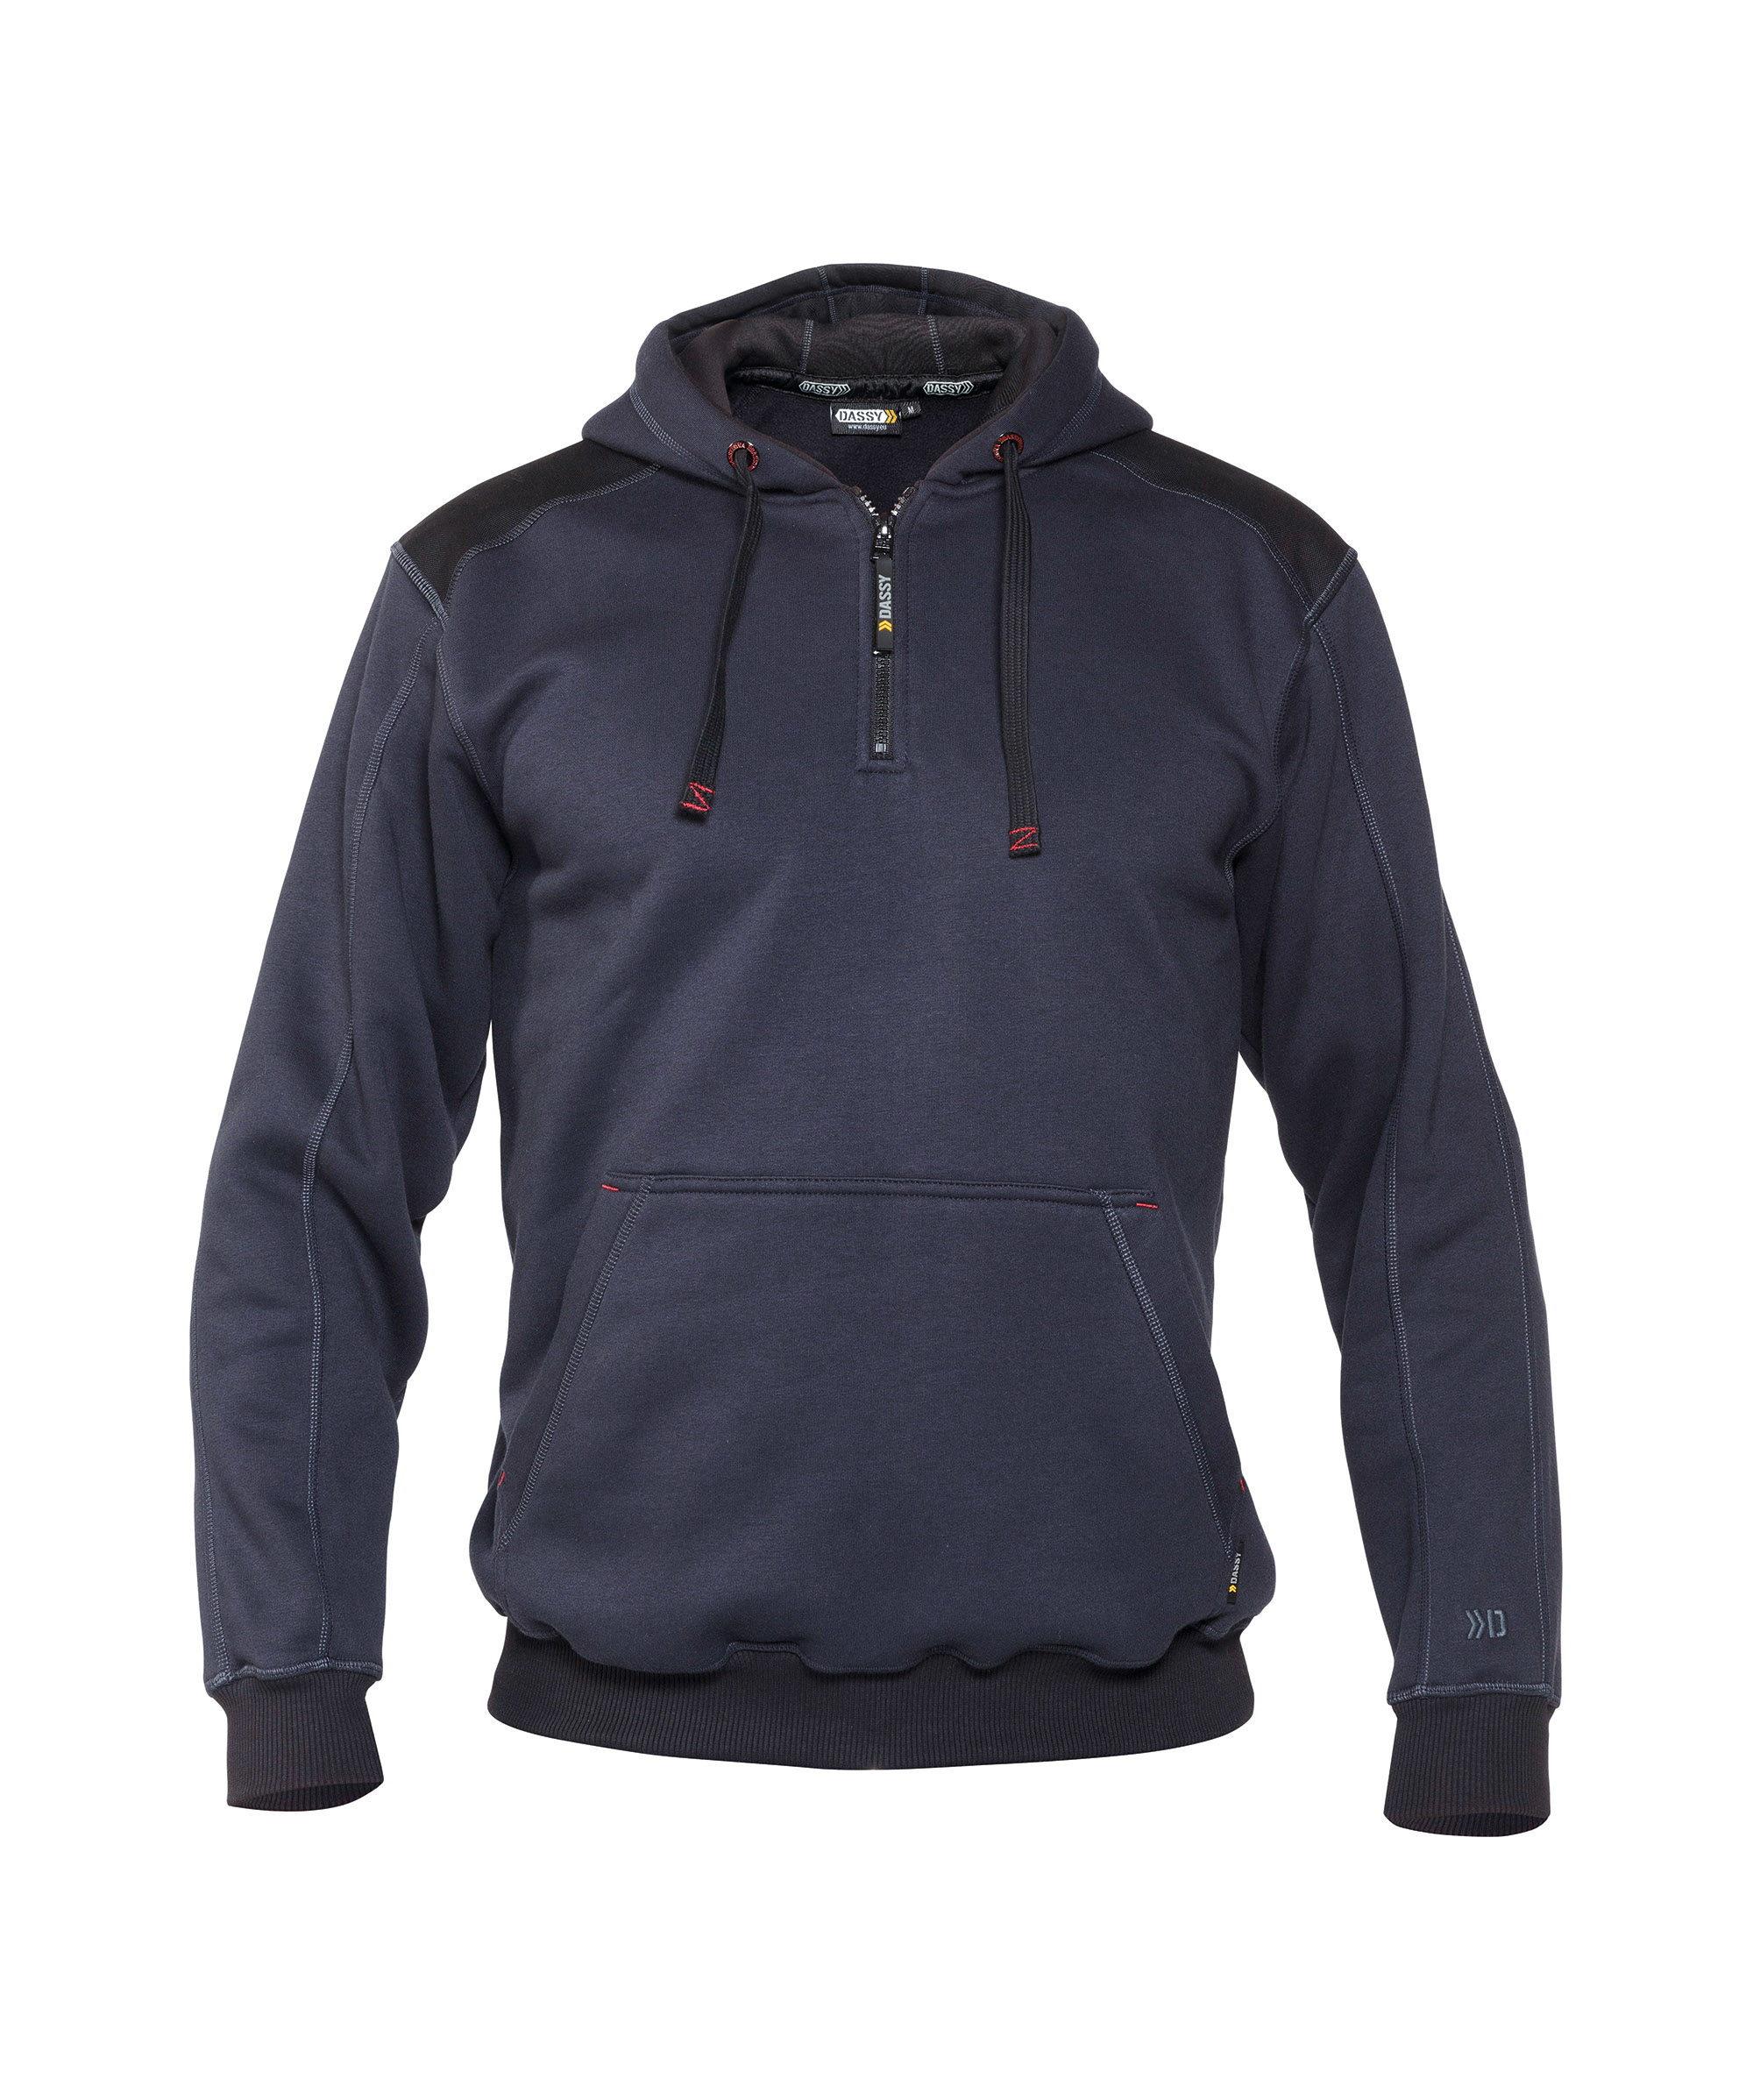 indy_hooded-sweatshirt-reinforced-with-canvas_midnight-blue-black_front.jpg